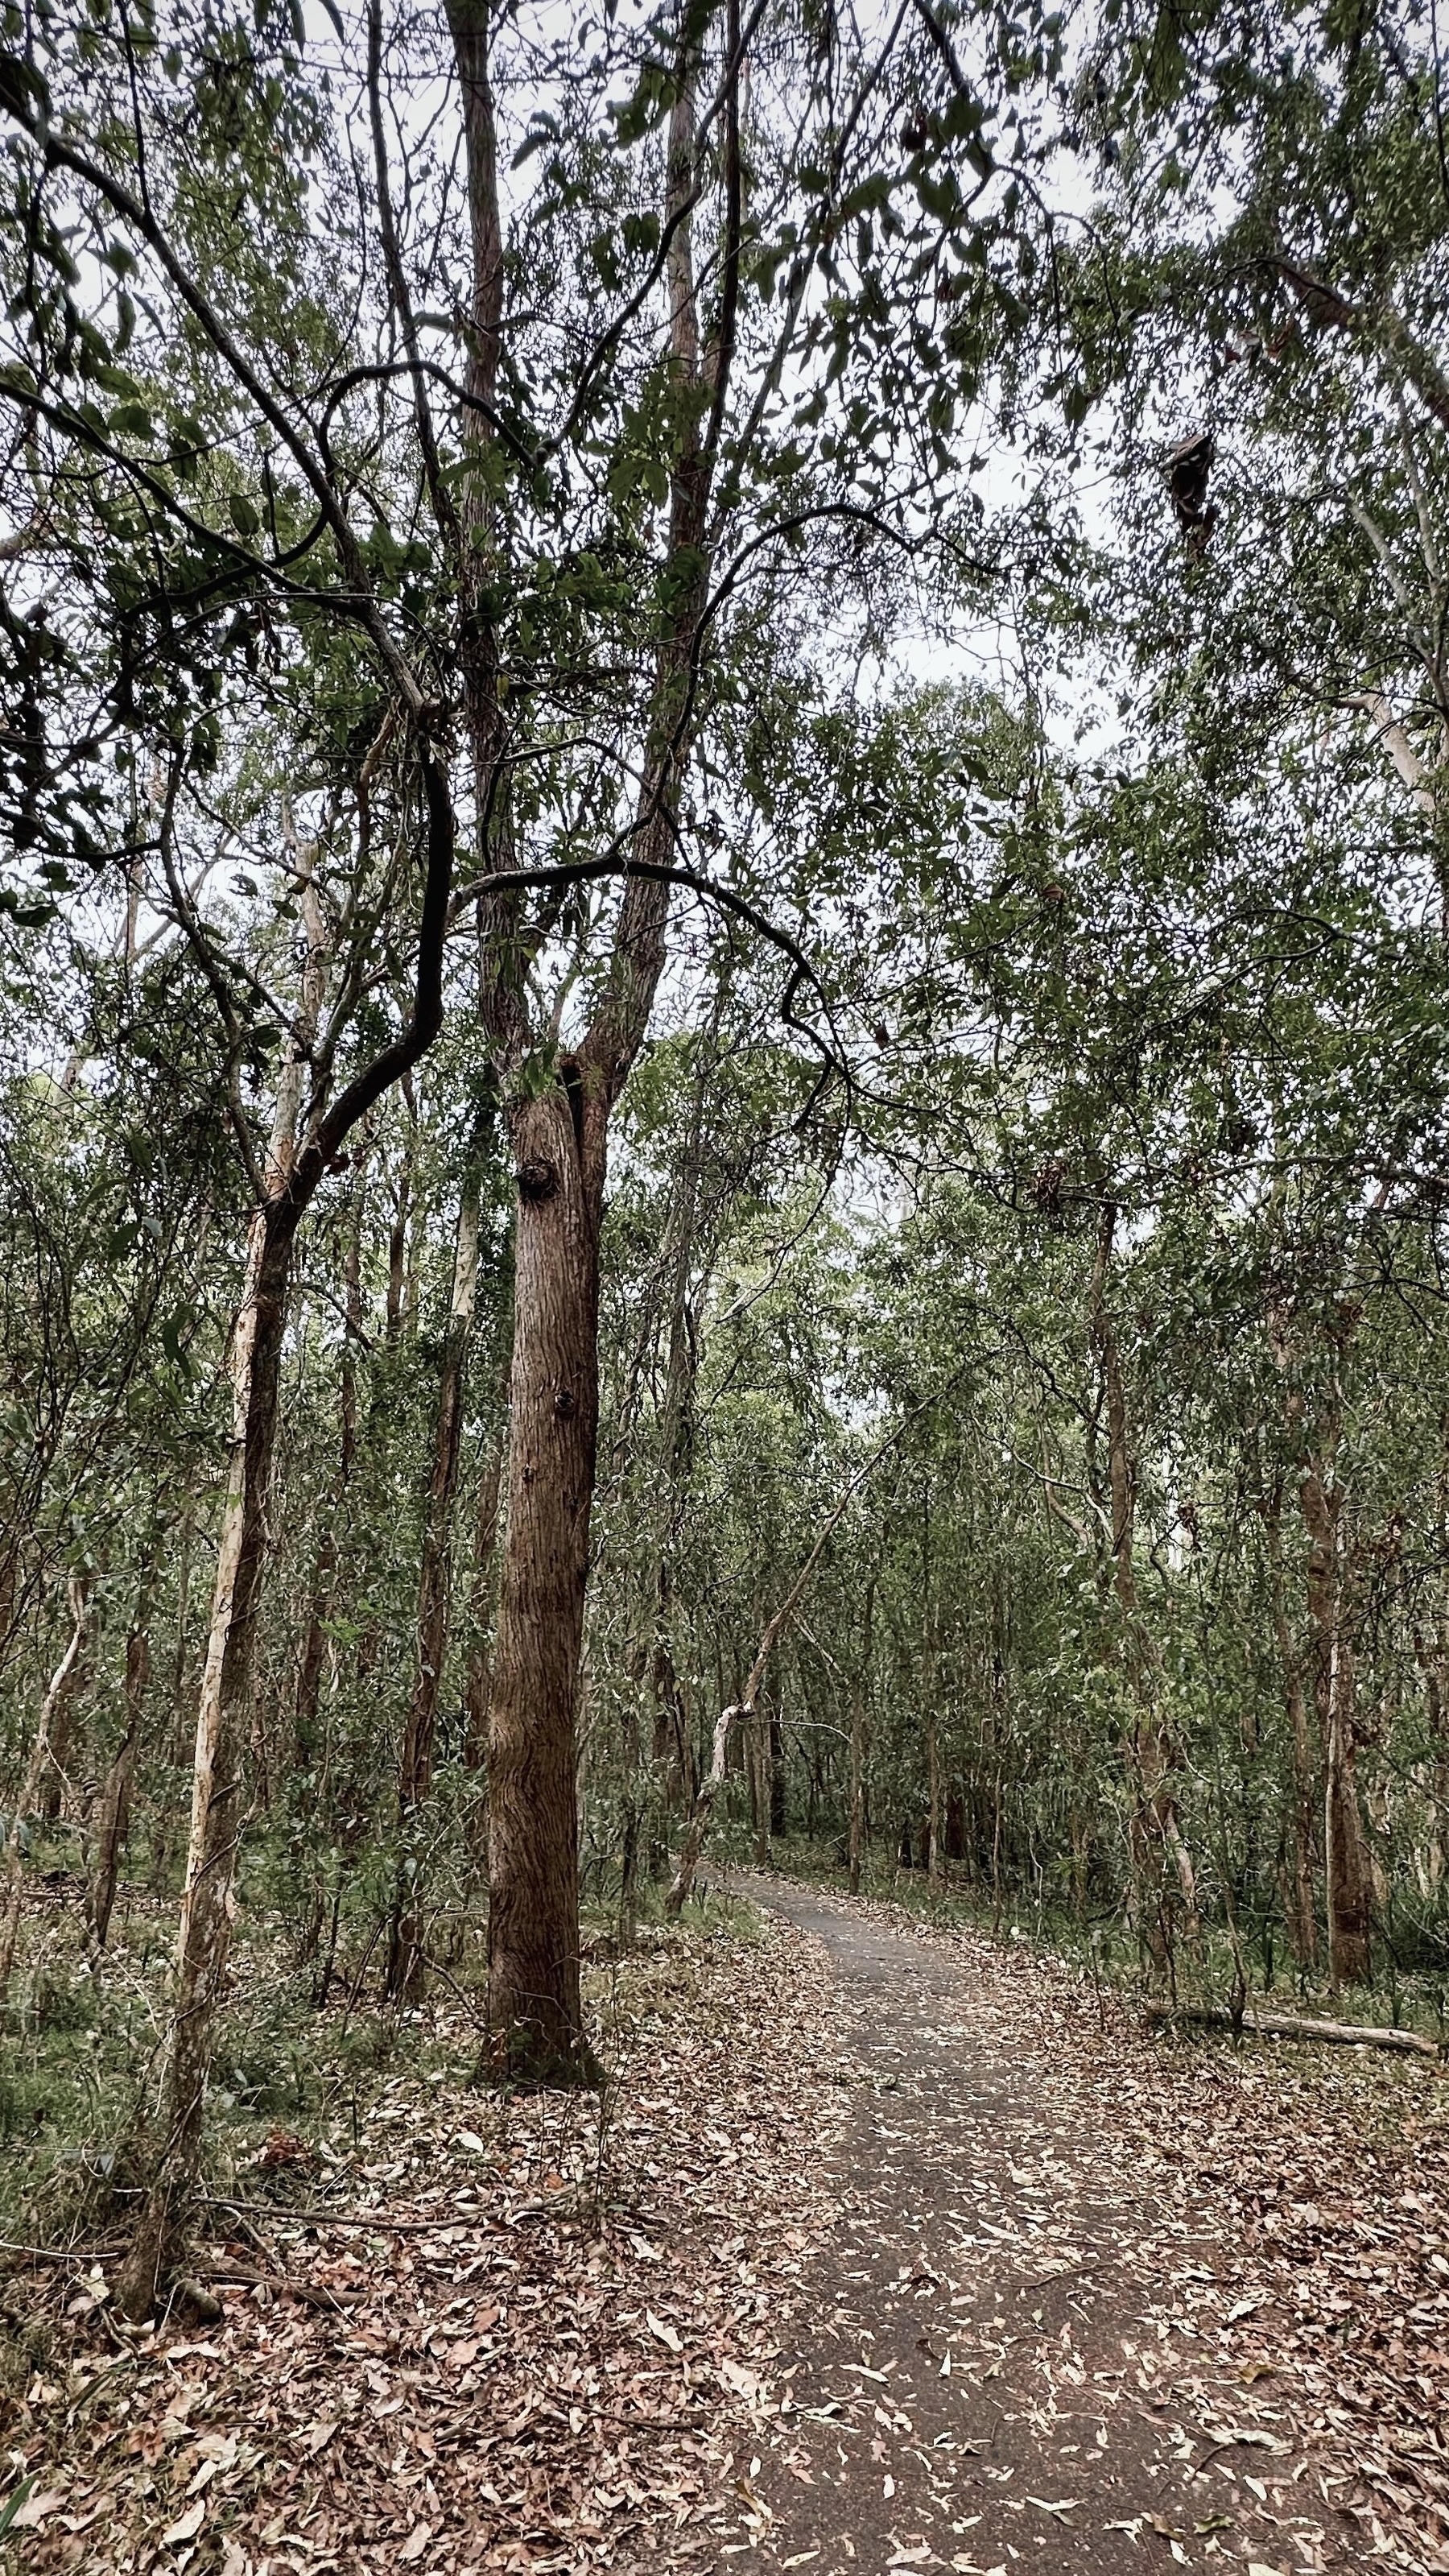 A leaf covered path leading into the distance through Australian bushland.